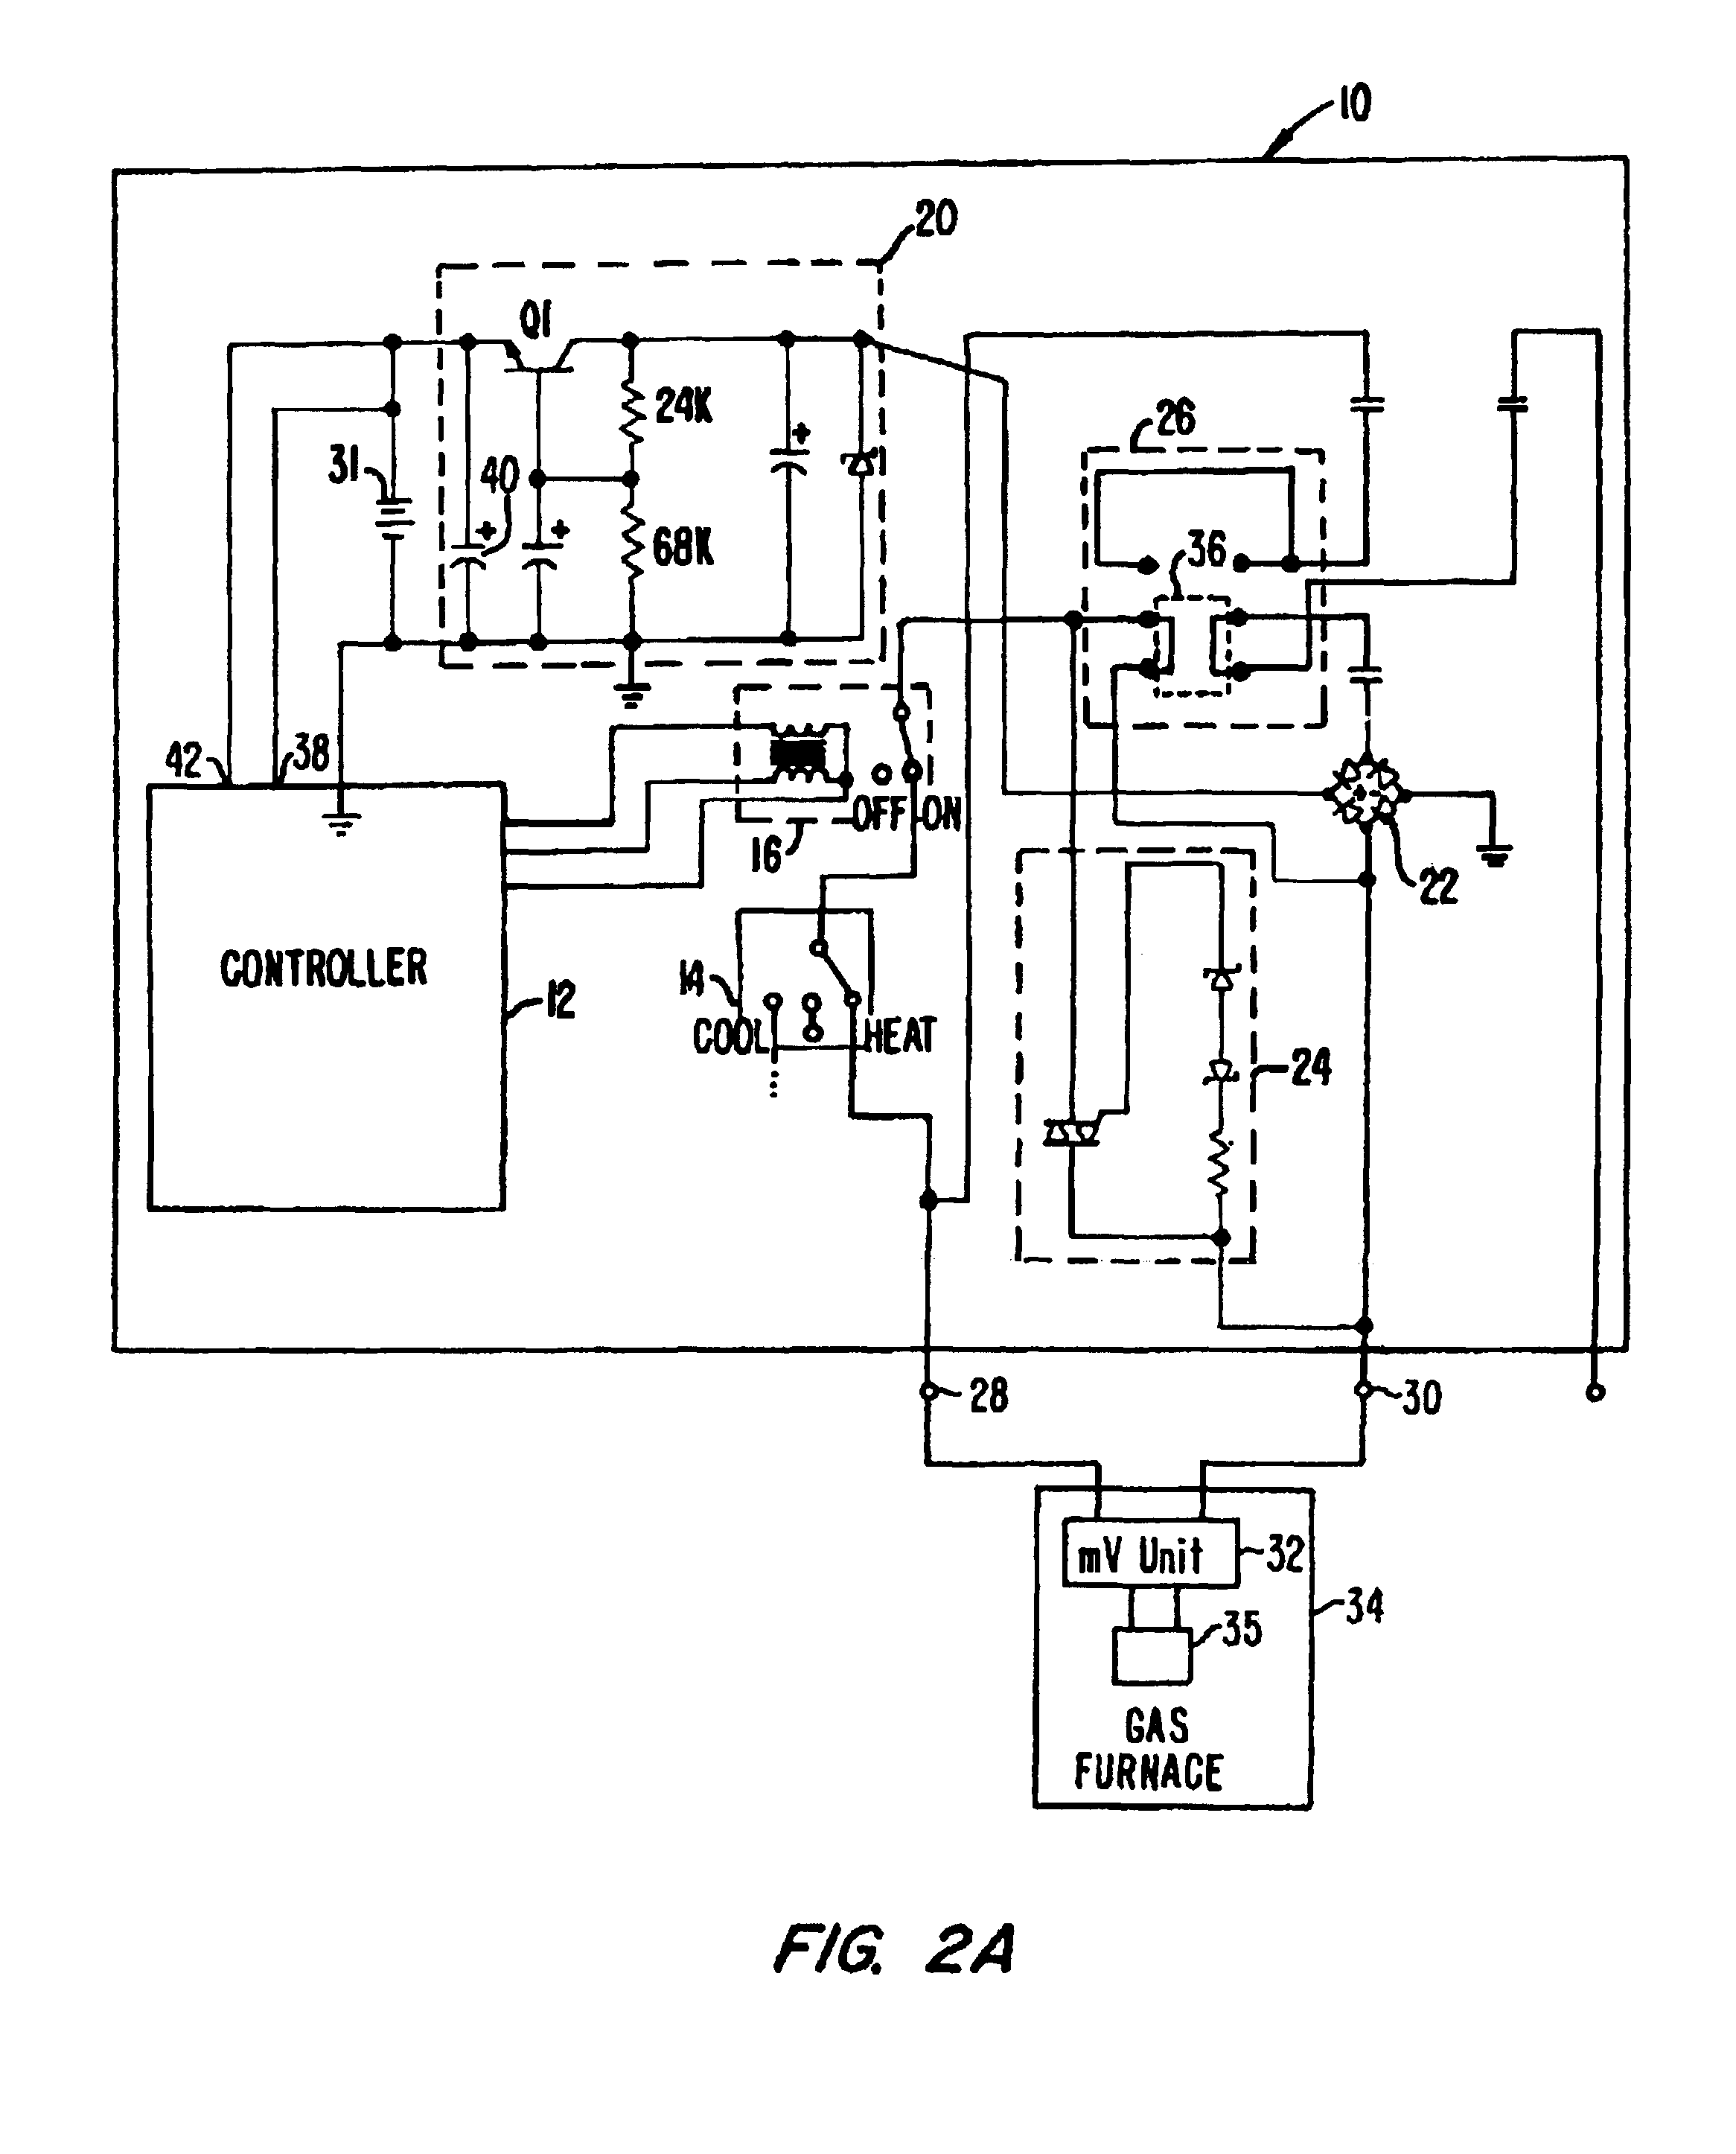 Thermostat operable from various power sources